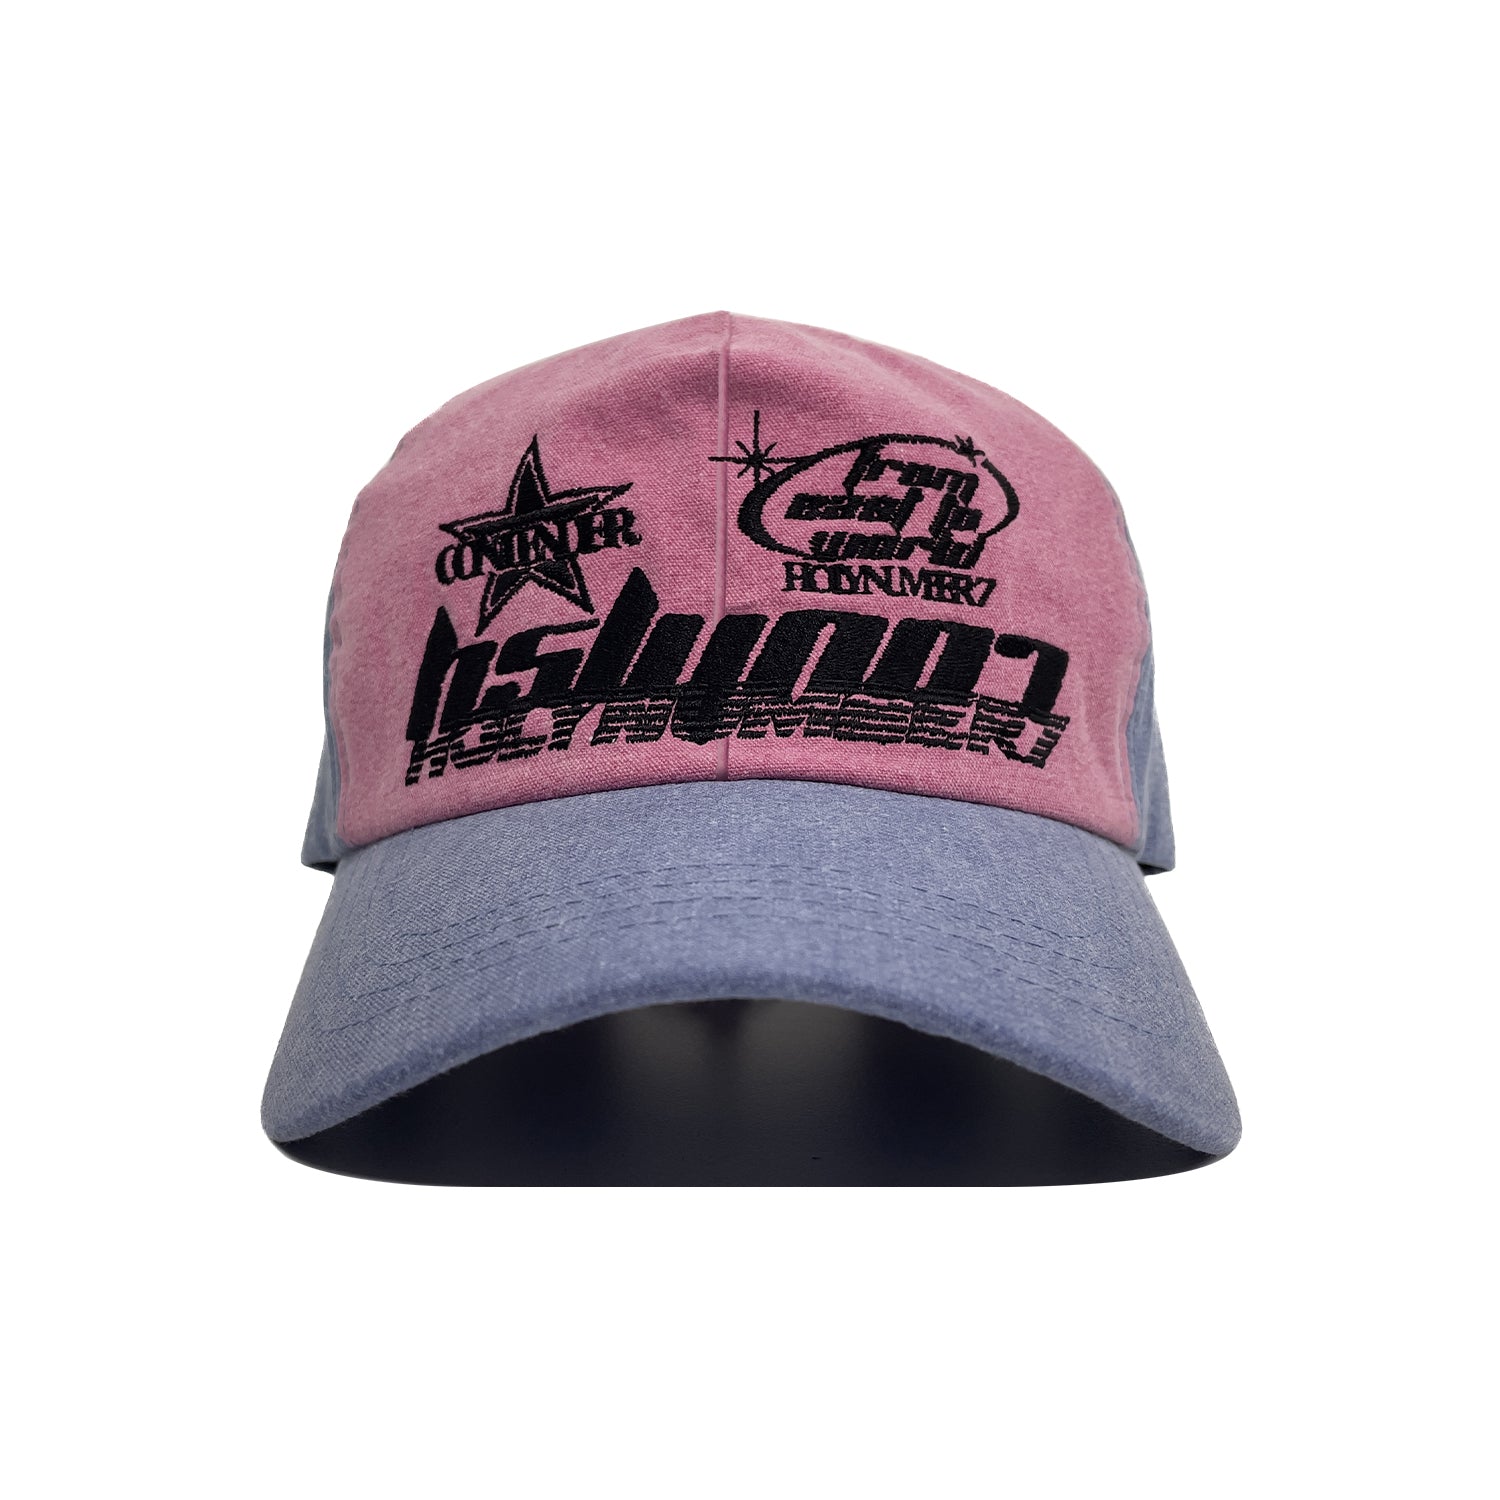 HOLYNUMBER7 X DKZ MBROIDERY CAP_PINK&BLUE